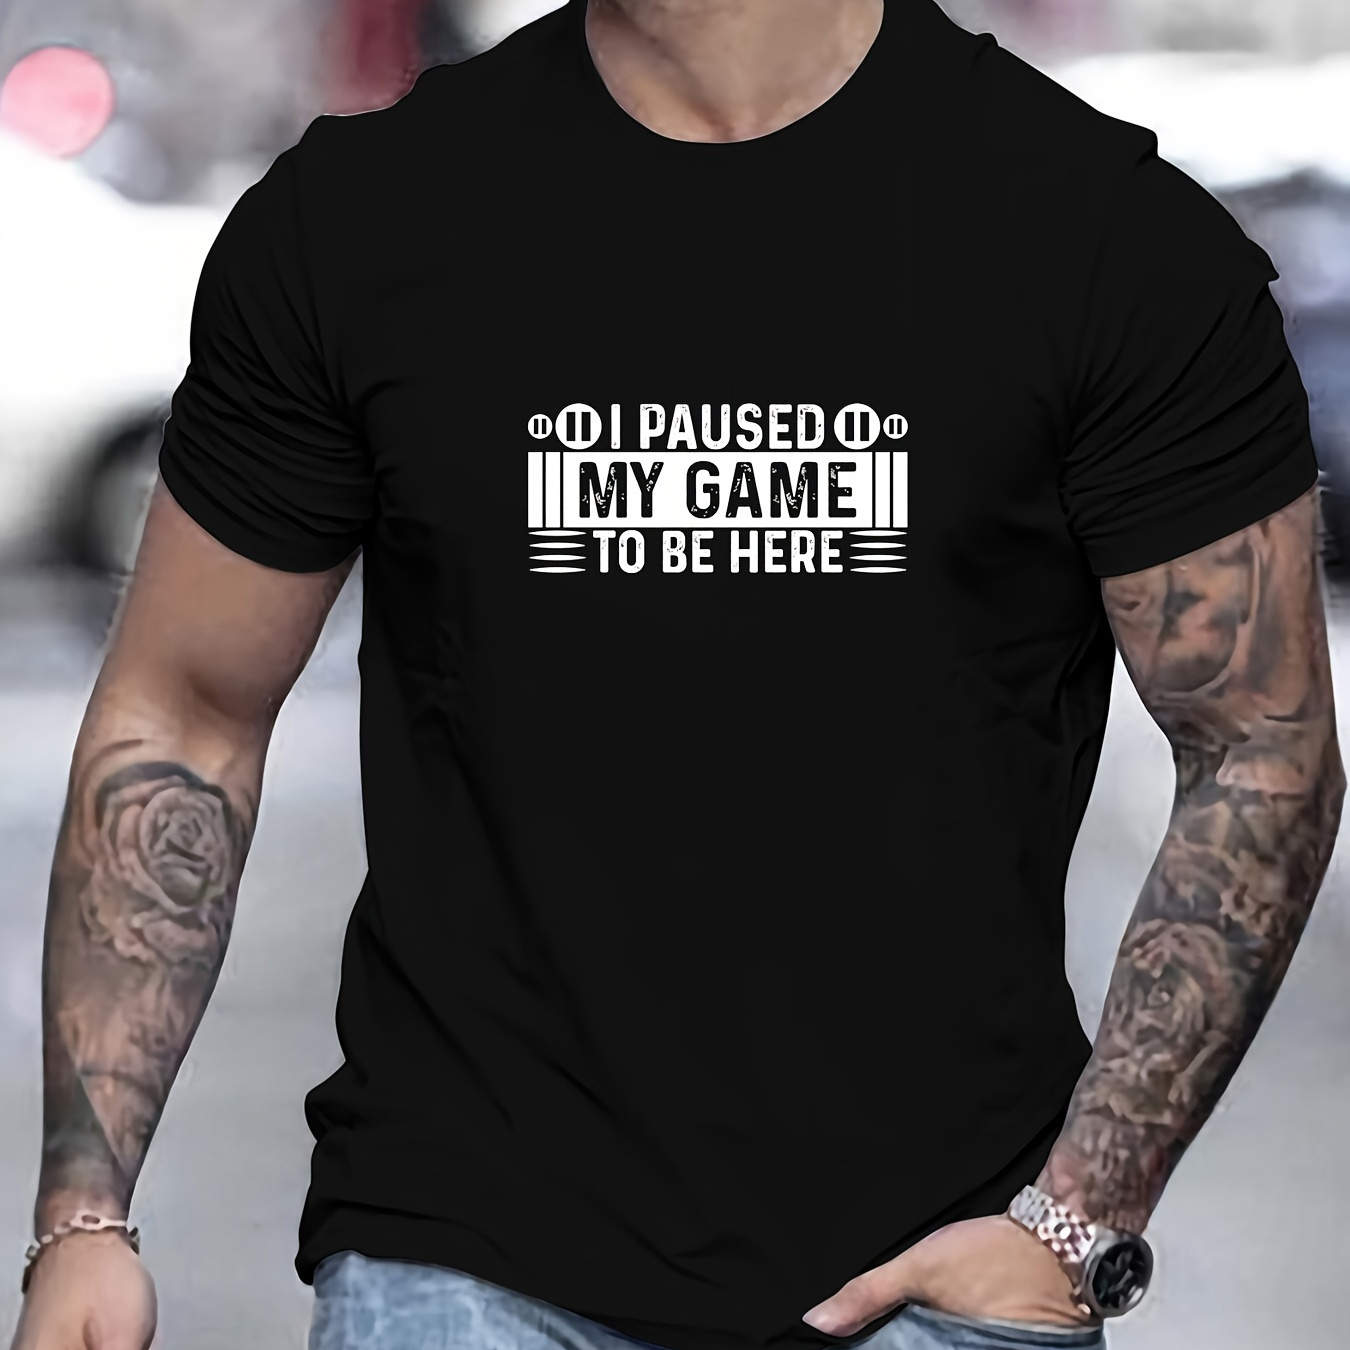 

Cotton Crew Neck T-shirt For Men With 'i Paused My Game To Be Here' Print - Casual Short Sleeve Knit Fabric Tee With Slight Stretch For Summer